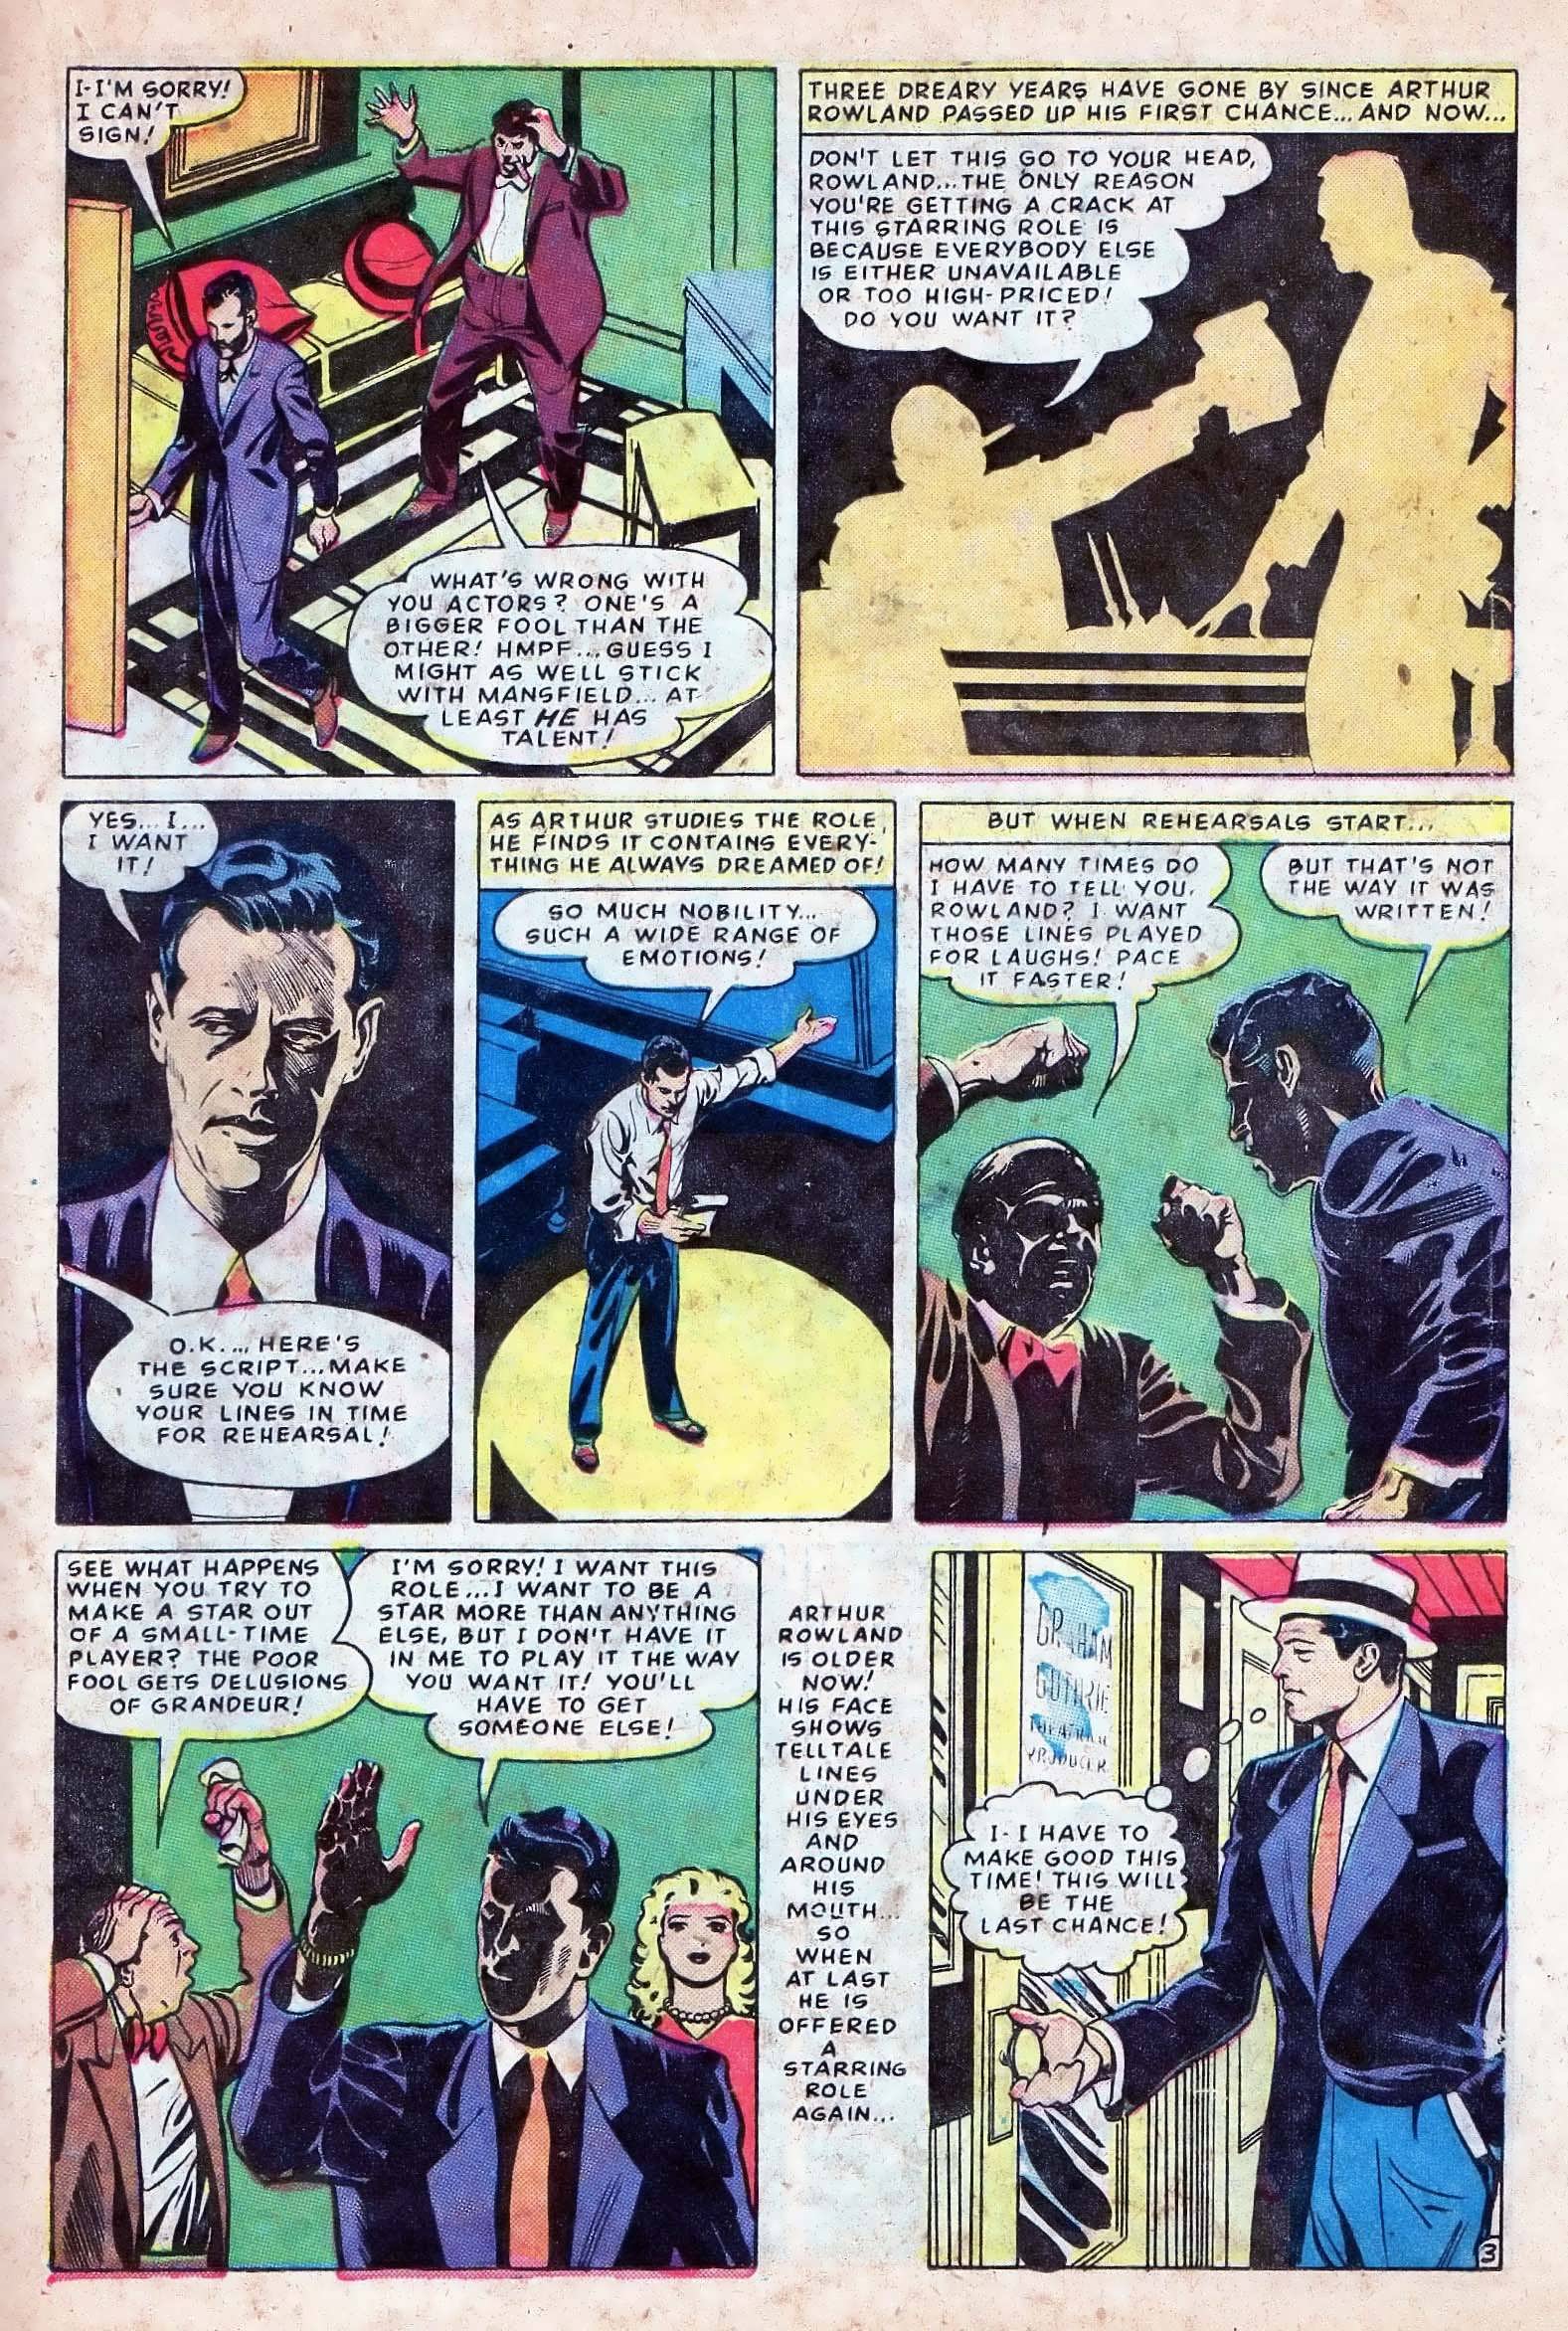 Marvel Tales (1949) 141 Page 22